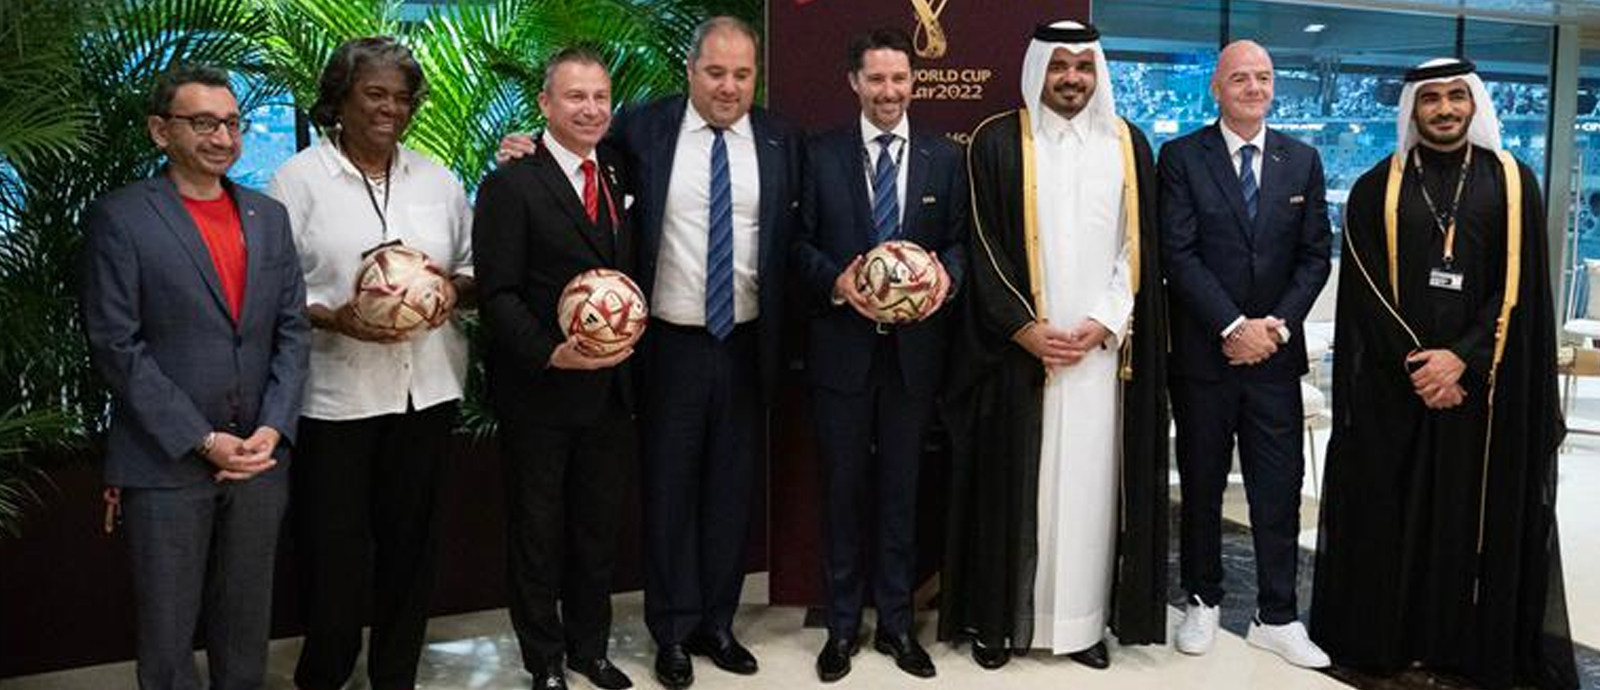 Sheikh Joaan hands over hosting mantle for 2026 World Cup to Canada, Mexico, US